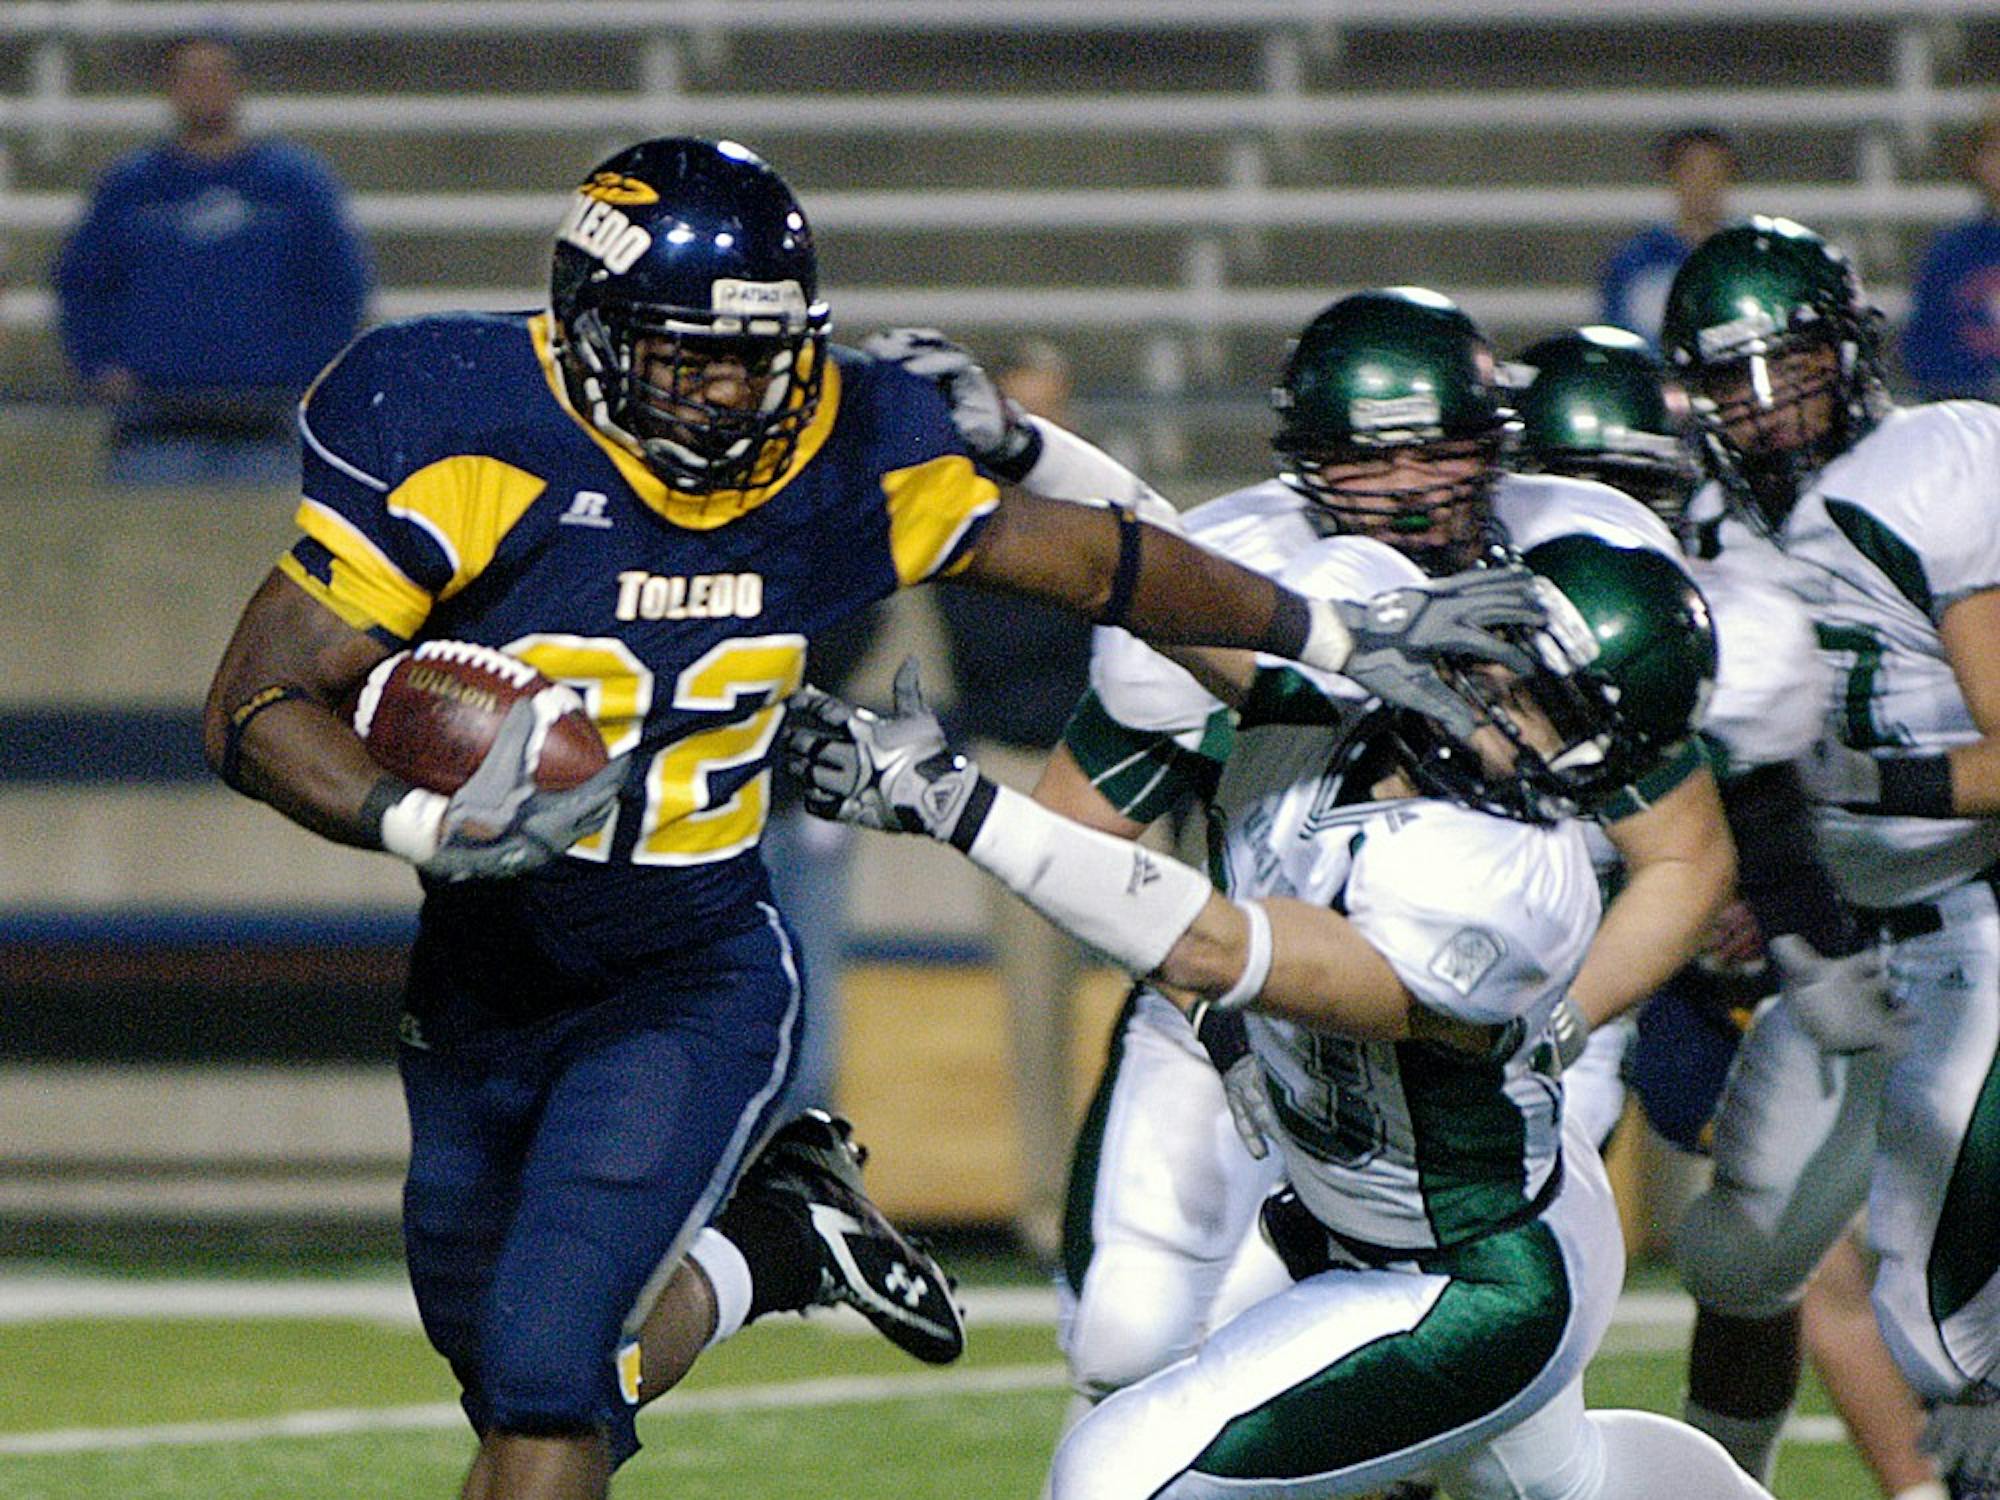 	Stiffarming tailback DaJuane Collins gains some of his 144 rushing yards in Toledo’s 47-21 win over EMU on Friday. Teammate Morgan Williams rushed for 155.